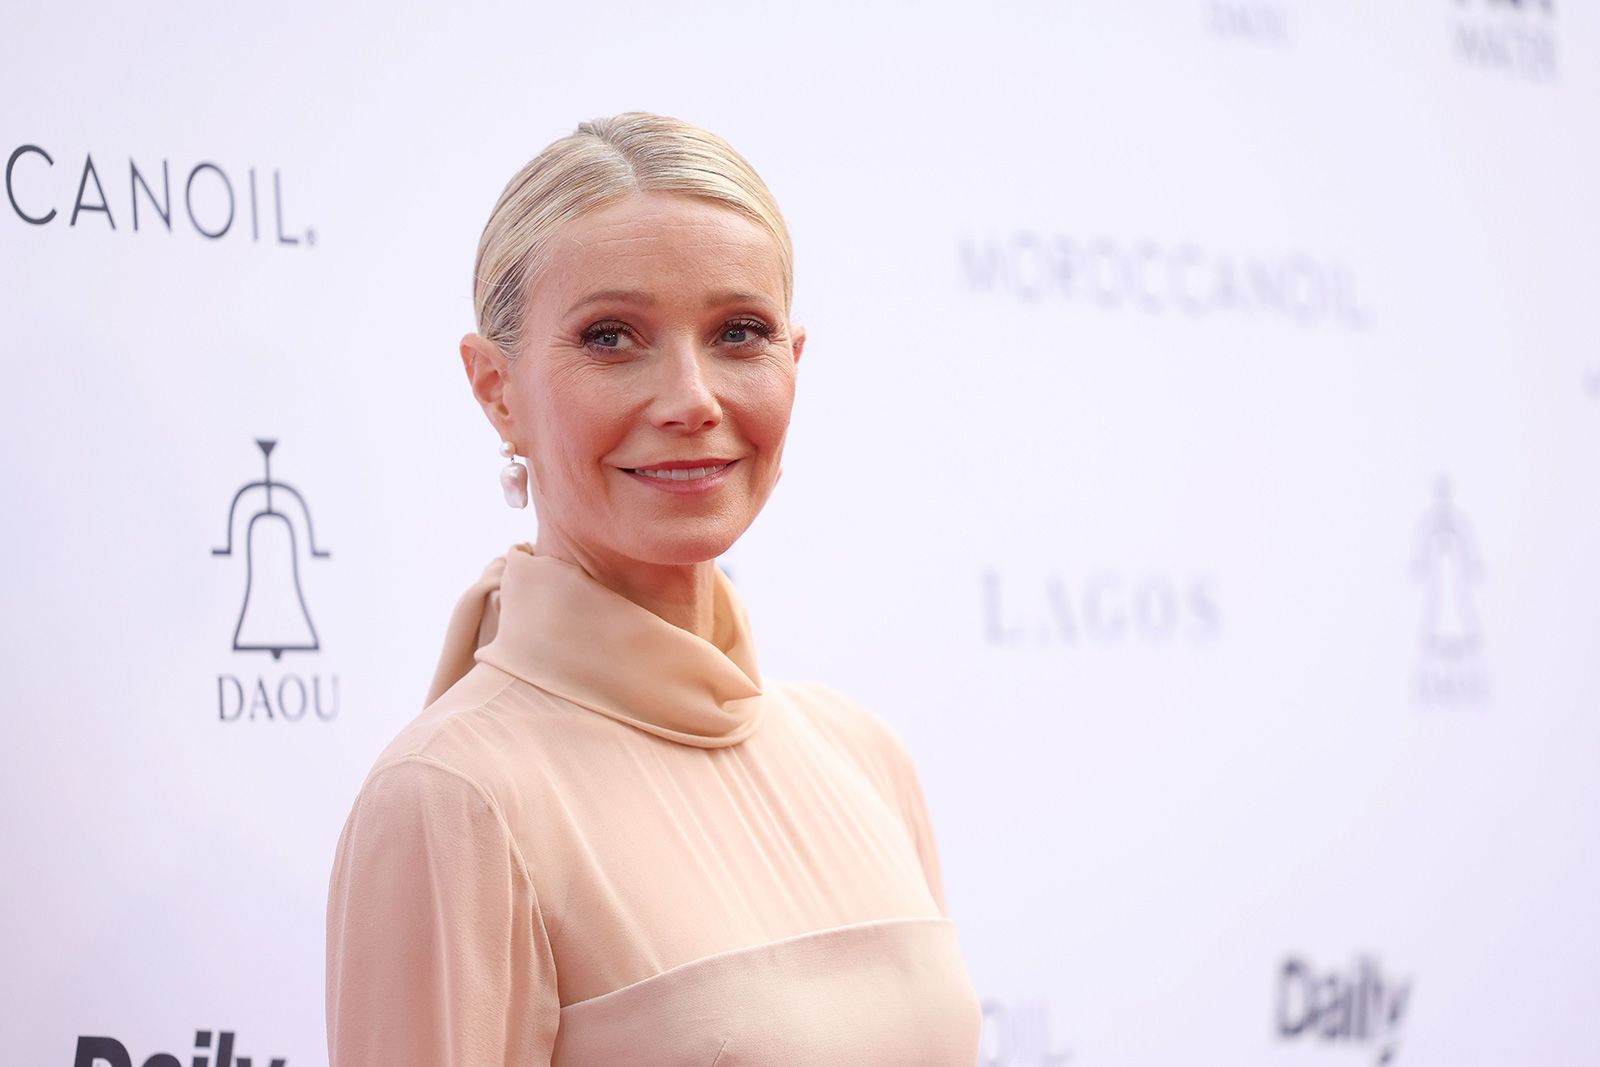 BEVERLY HILLS, CALIFORNIA - APRIL 23: Gwyneth Paltrow, Powerhouse Brand of the Year Award recipient, attends The Daily Front Row's Seventh Annual Fashion Los Angeles Awards at The Beverly Hills Hotel on April 23, 2023 in Beverly Hills, California. (Photo by Monica Schipper/Getty Images for Daily Front Row)